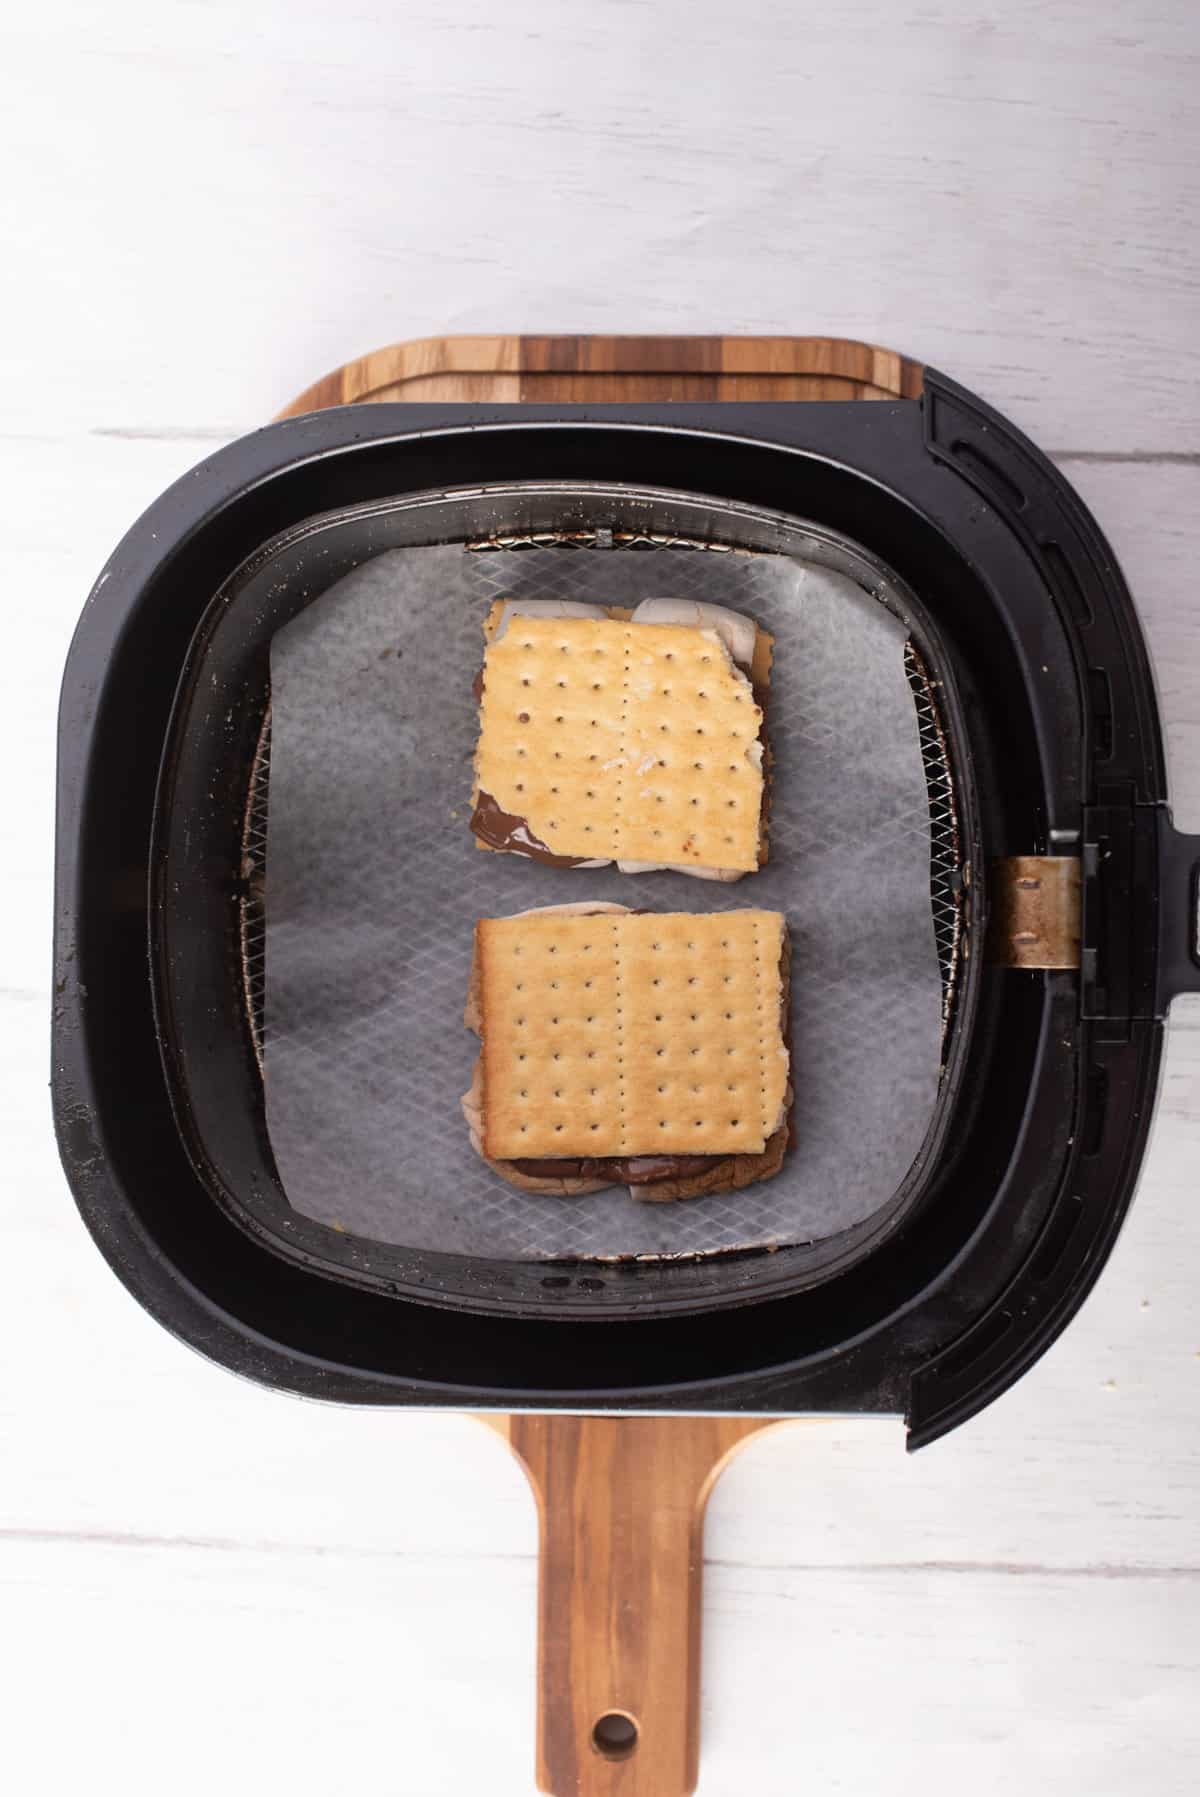 Overhead view of two Graham crackers filled with chocolate and marshmallows placed on an air fryer basket.